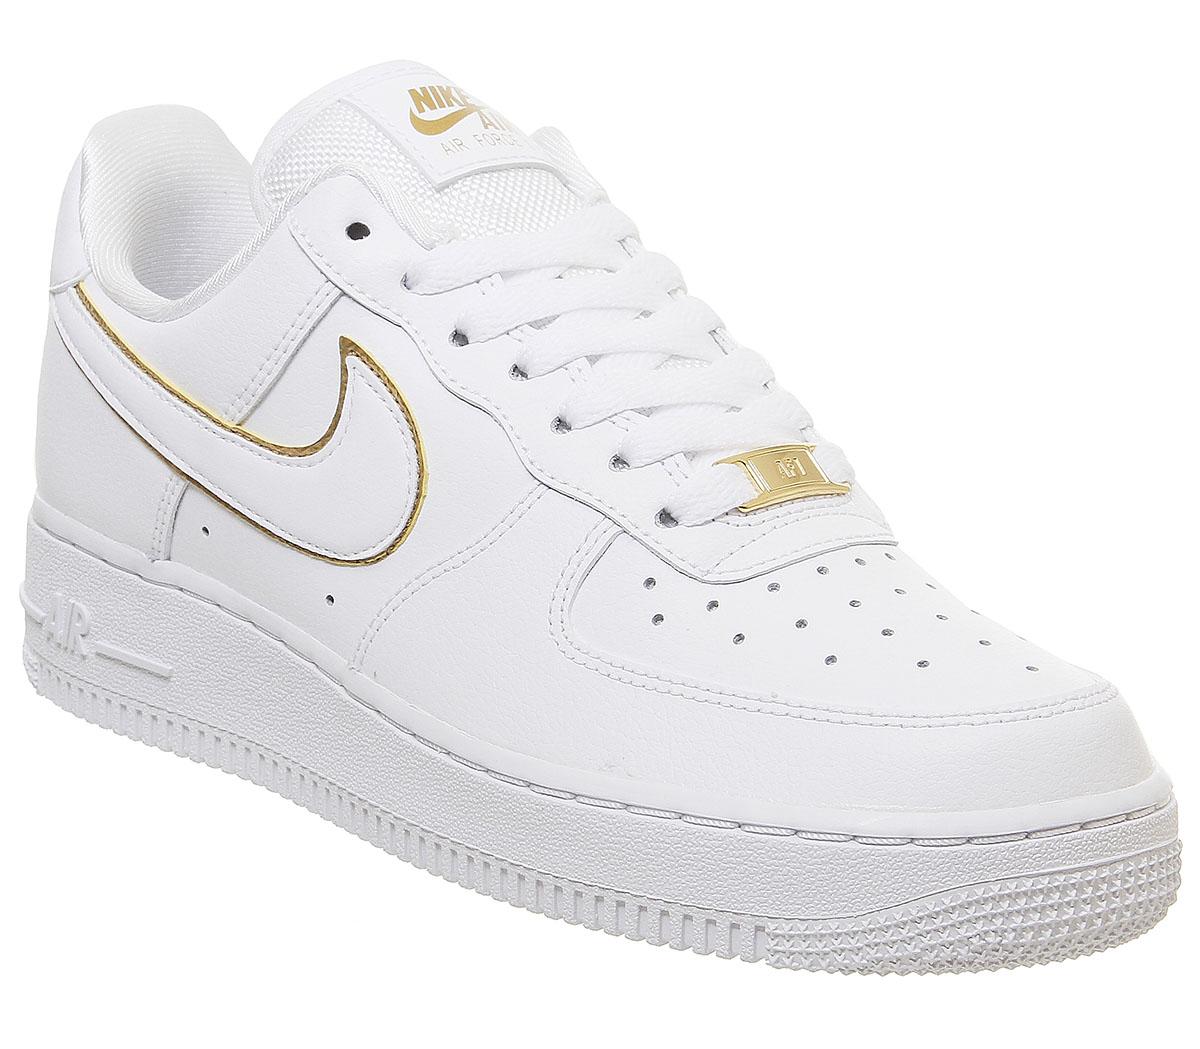 Nike Air Force 1 07 Trainers White 